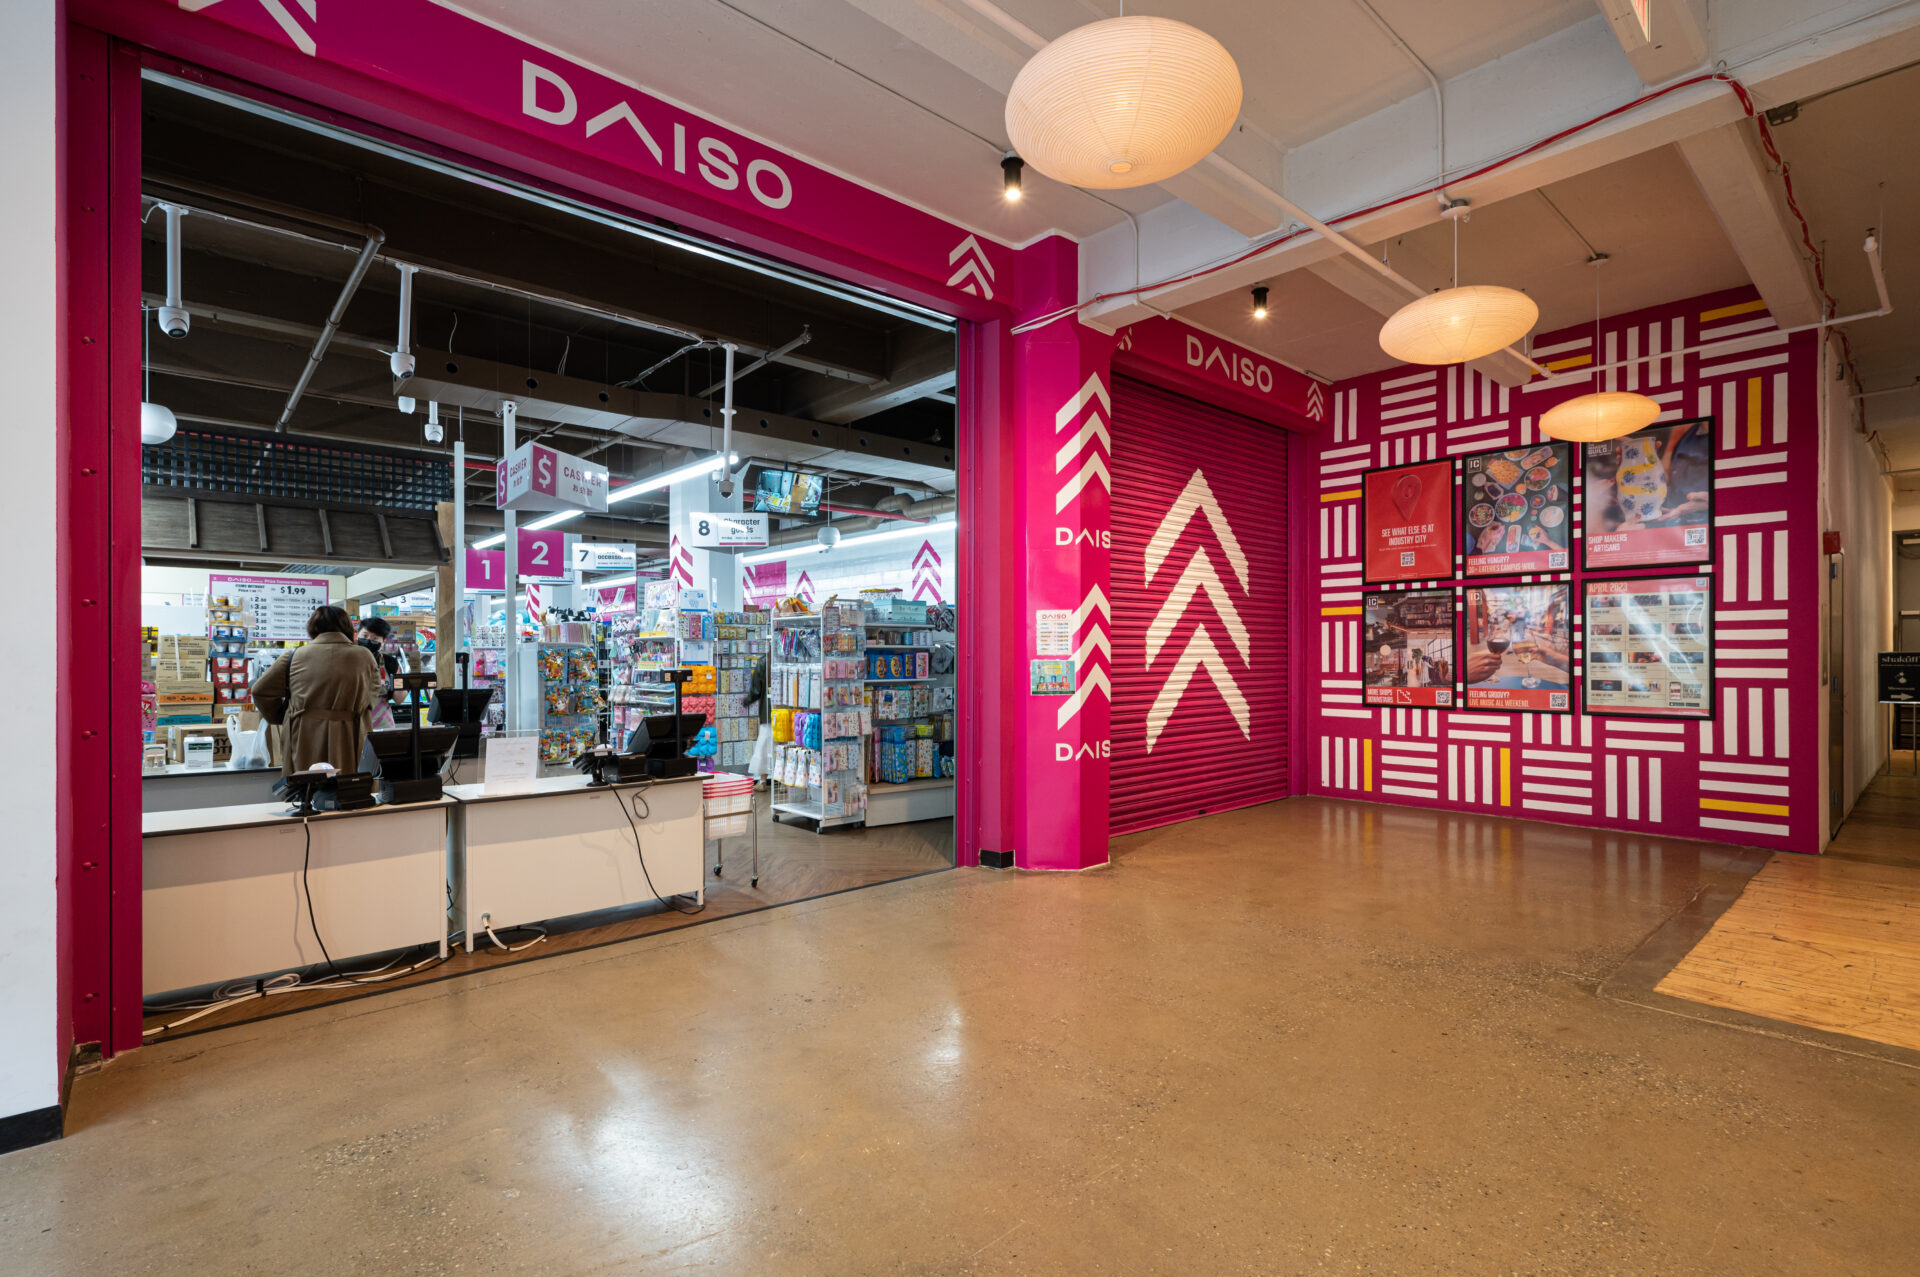 The exterior of a storefront called "Daiso."